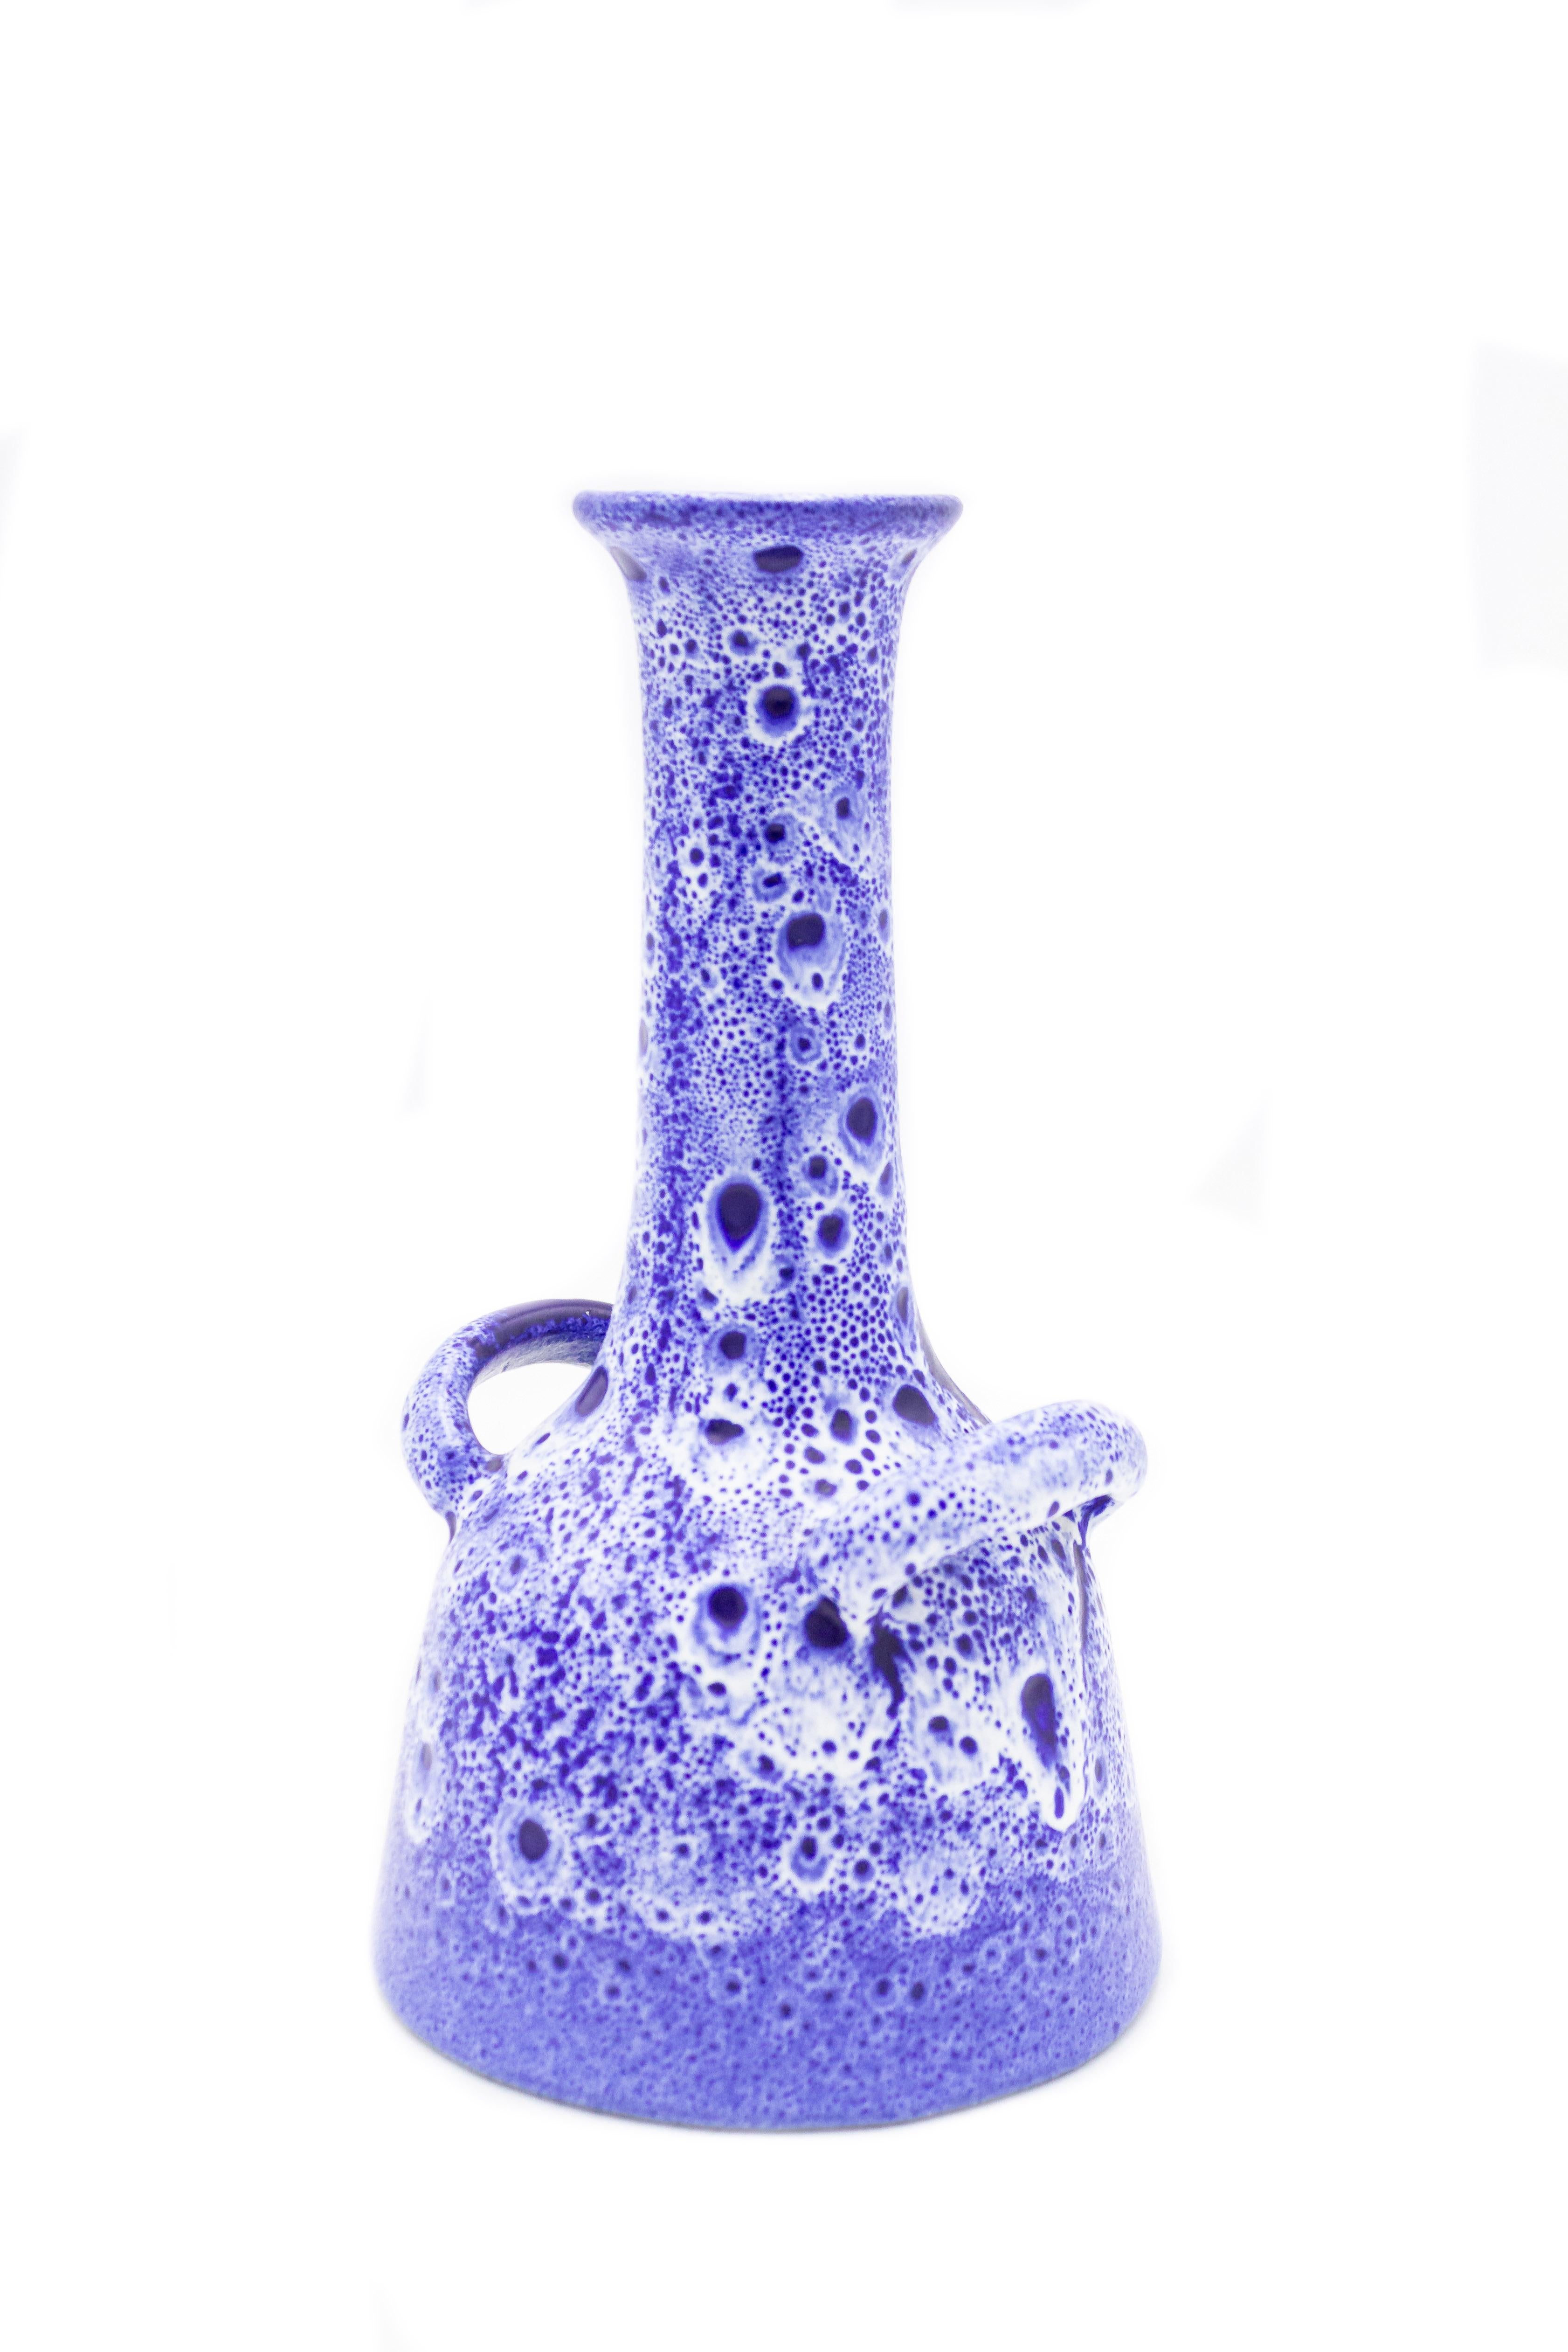 Post-War West Germany purple and white speckled ceramic vase with elongated handles and long taped neck.
 